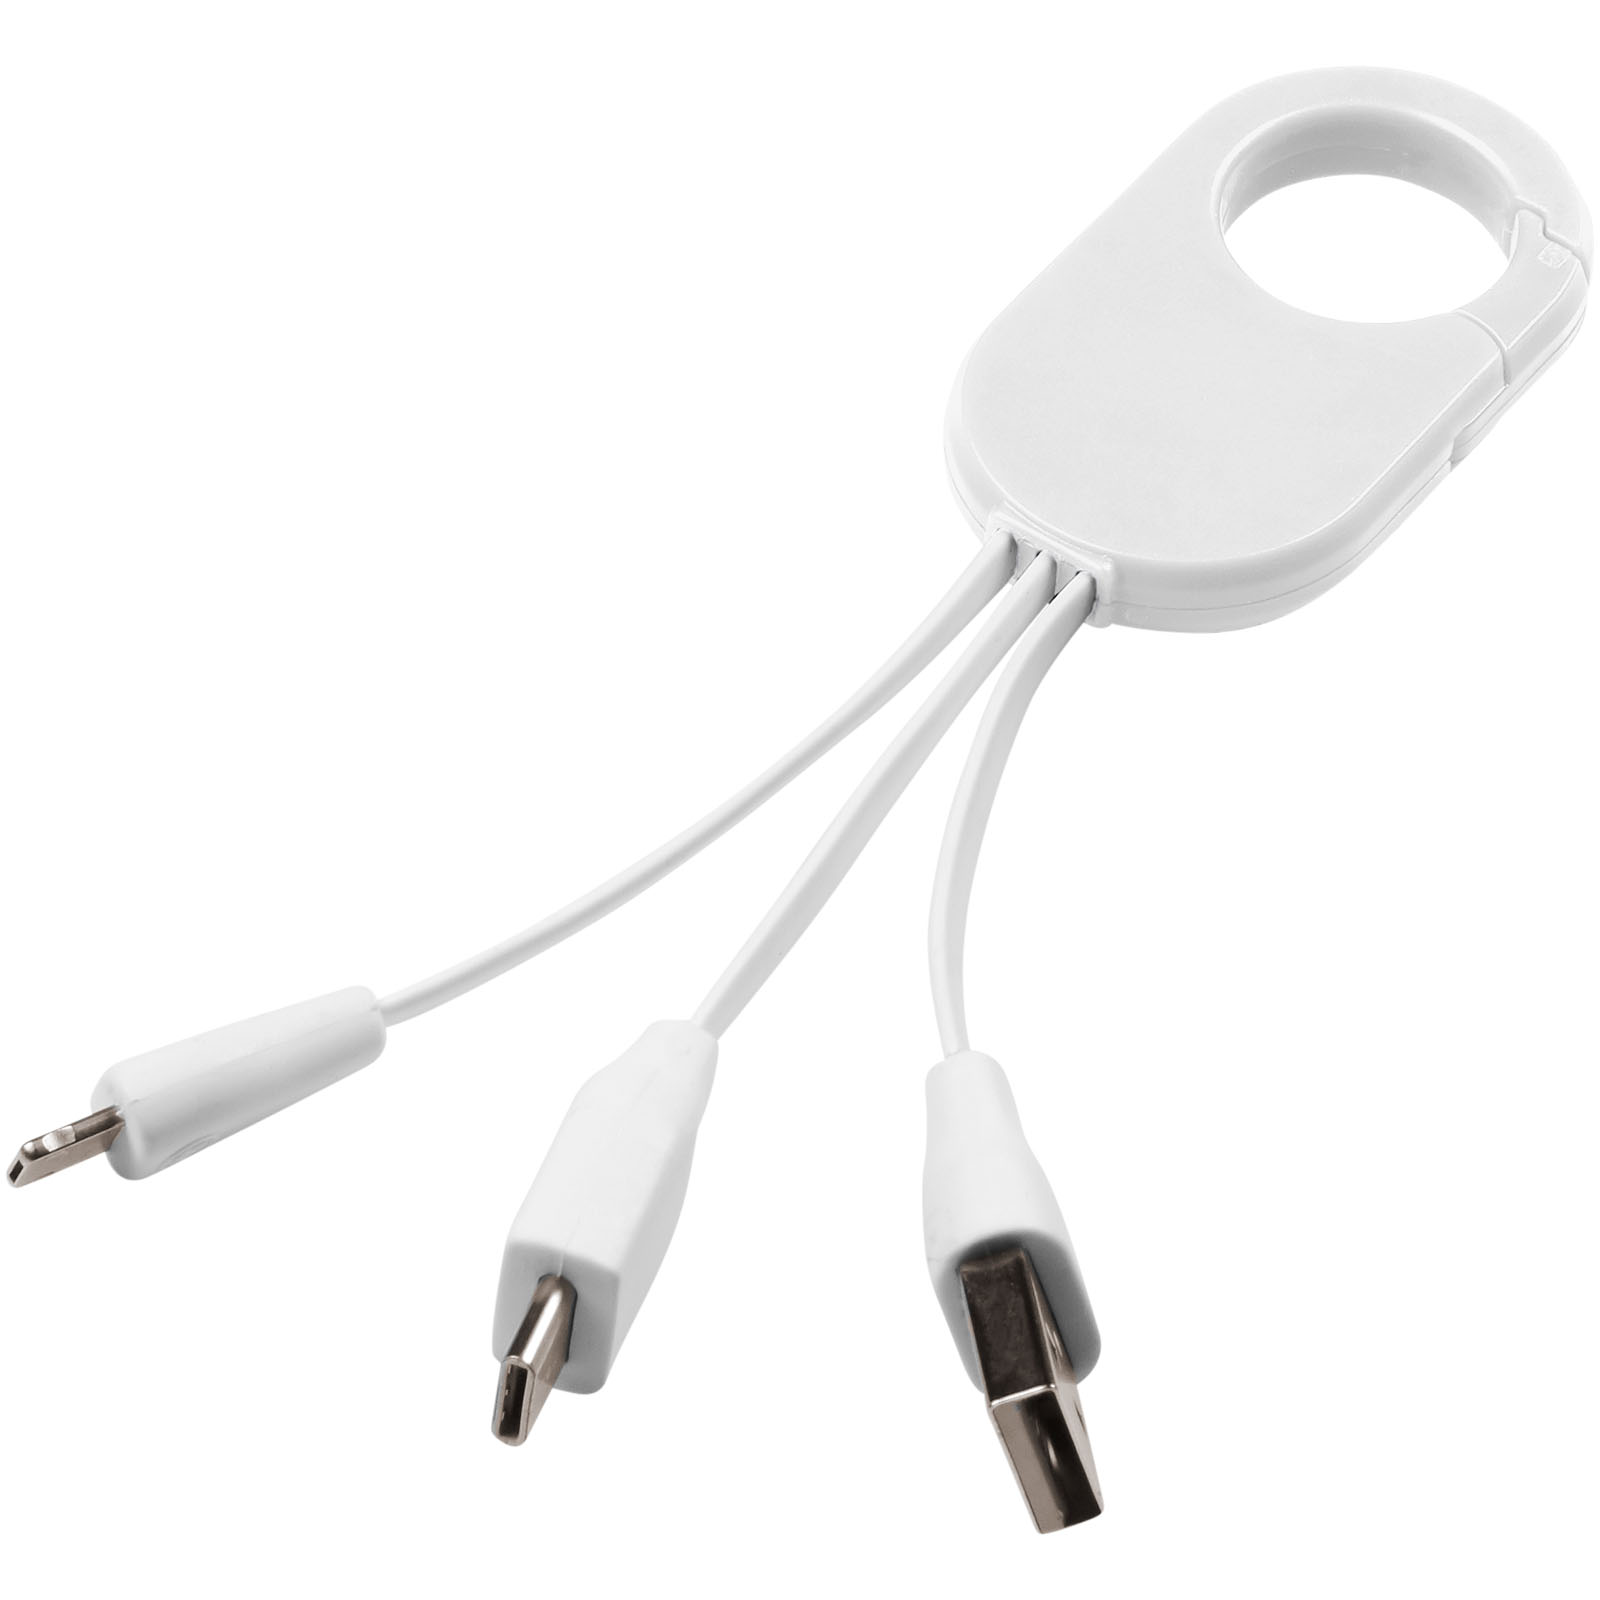 Advertising Cables - Troop 3-in-1 charging cable